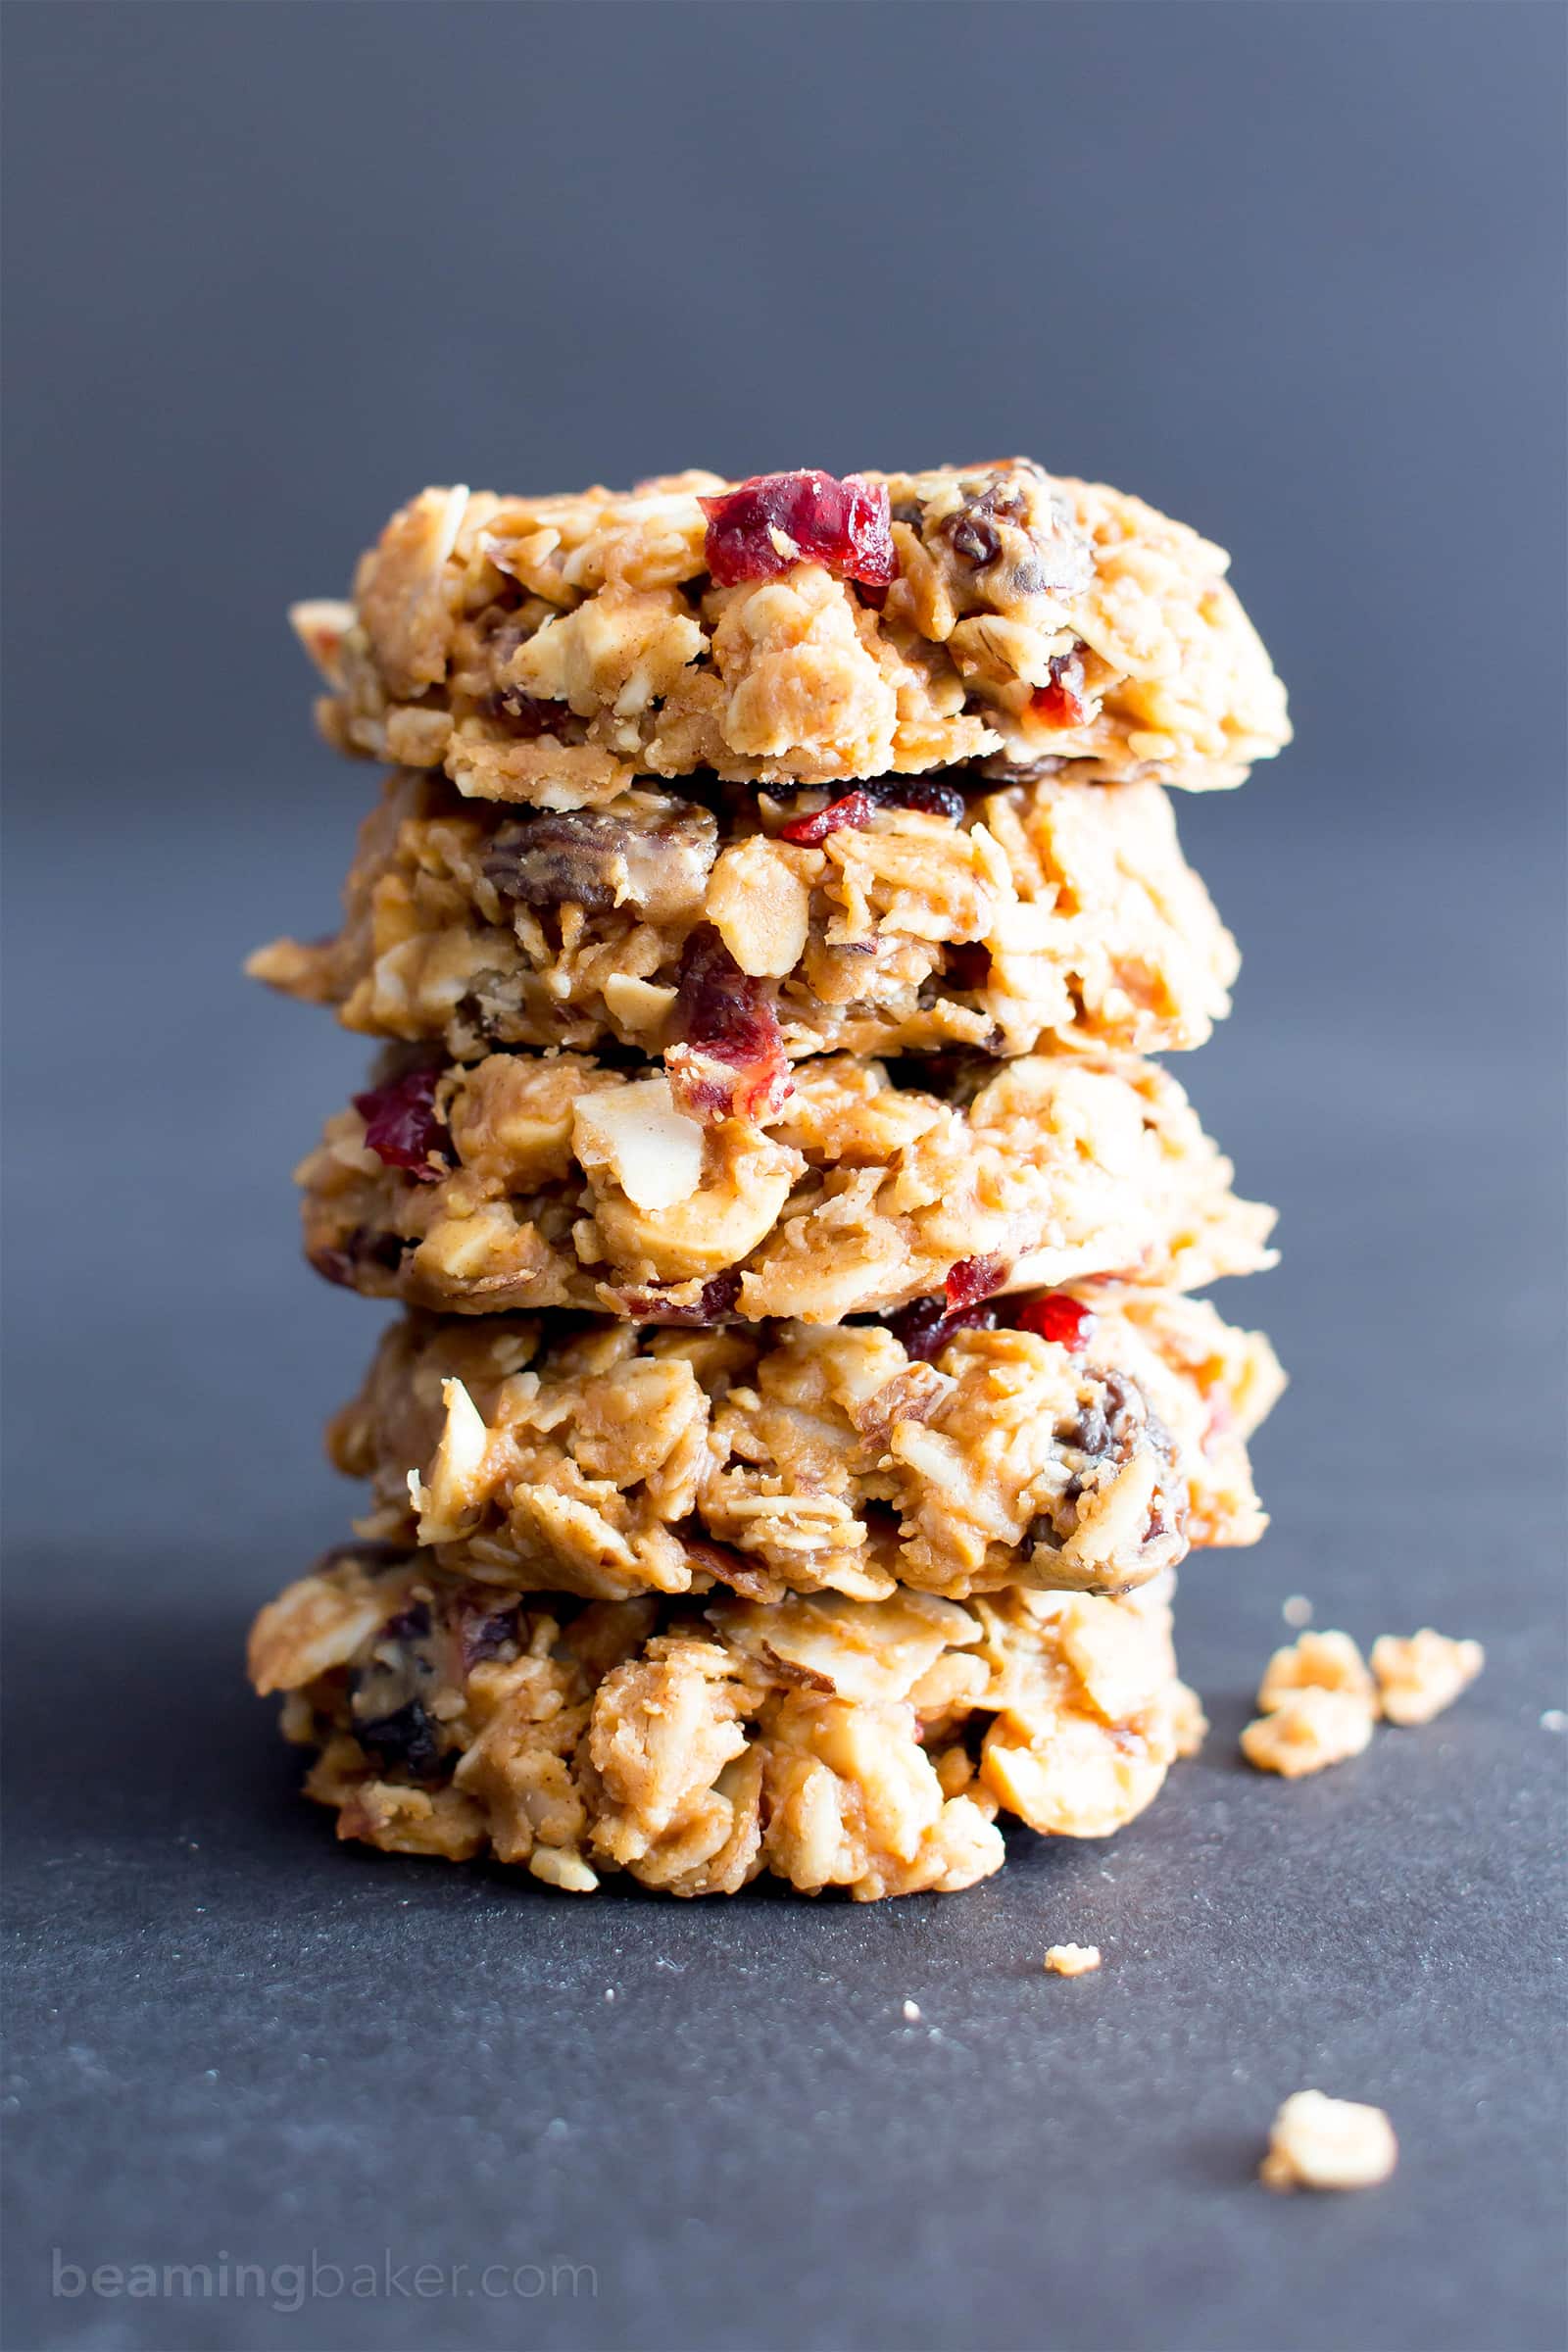 No Bake Gluten Free Peanut Butter Fruit & Nut Cookies (V, GF, DF): an easy, one bowl recipe for no bake peanut butter cookies bursting with dried fruits and nuts! #ProteinPacked #Vegan #GlutenFree #DairyFree | BeamingBaker.com